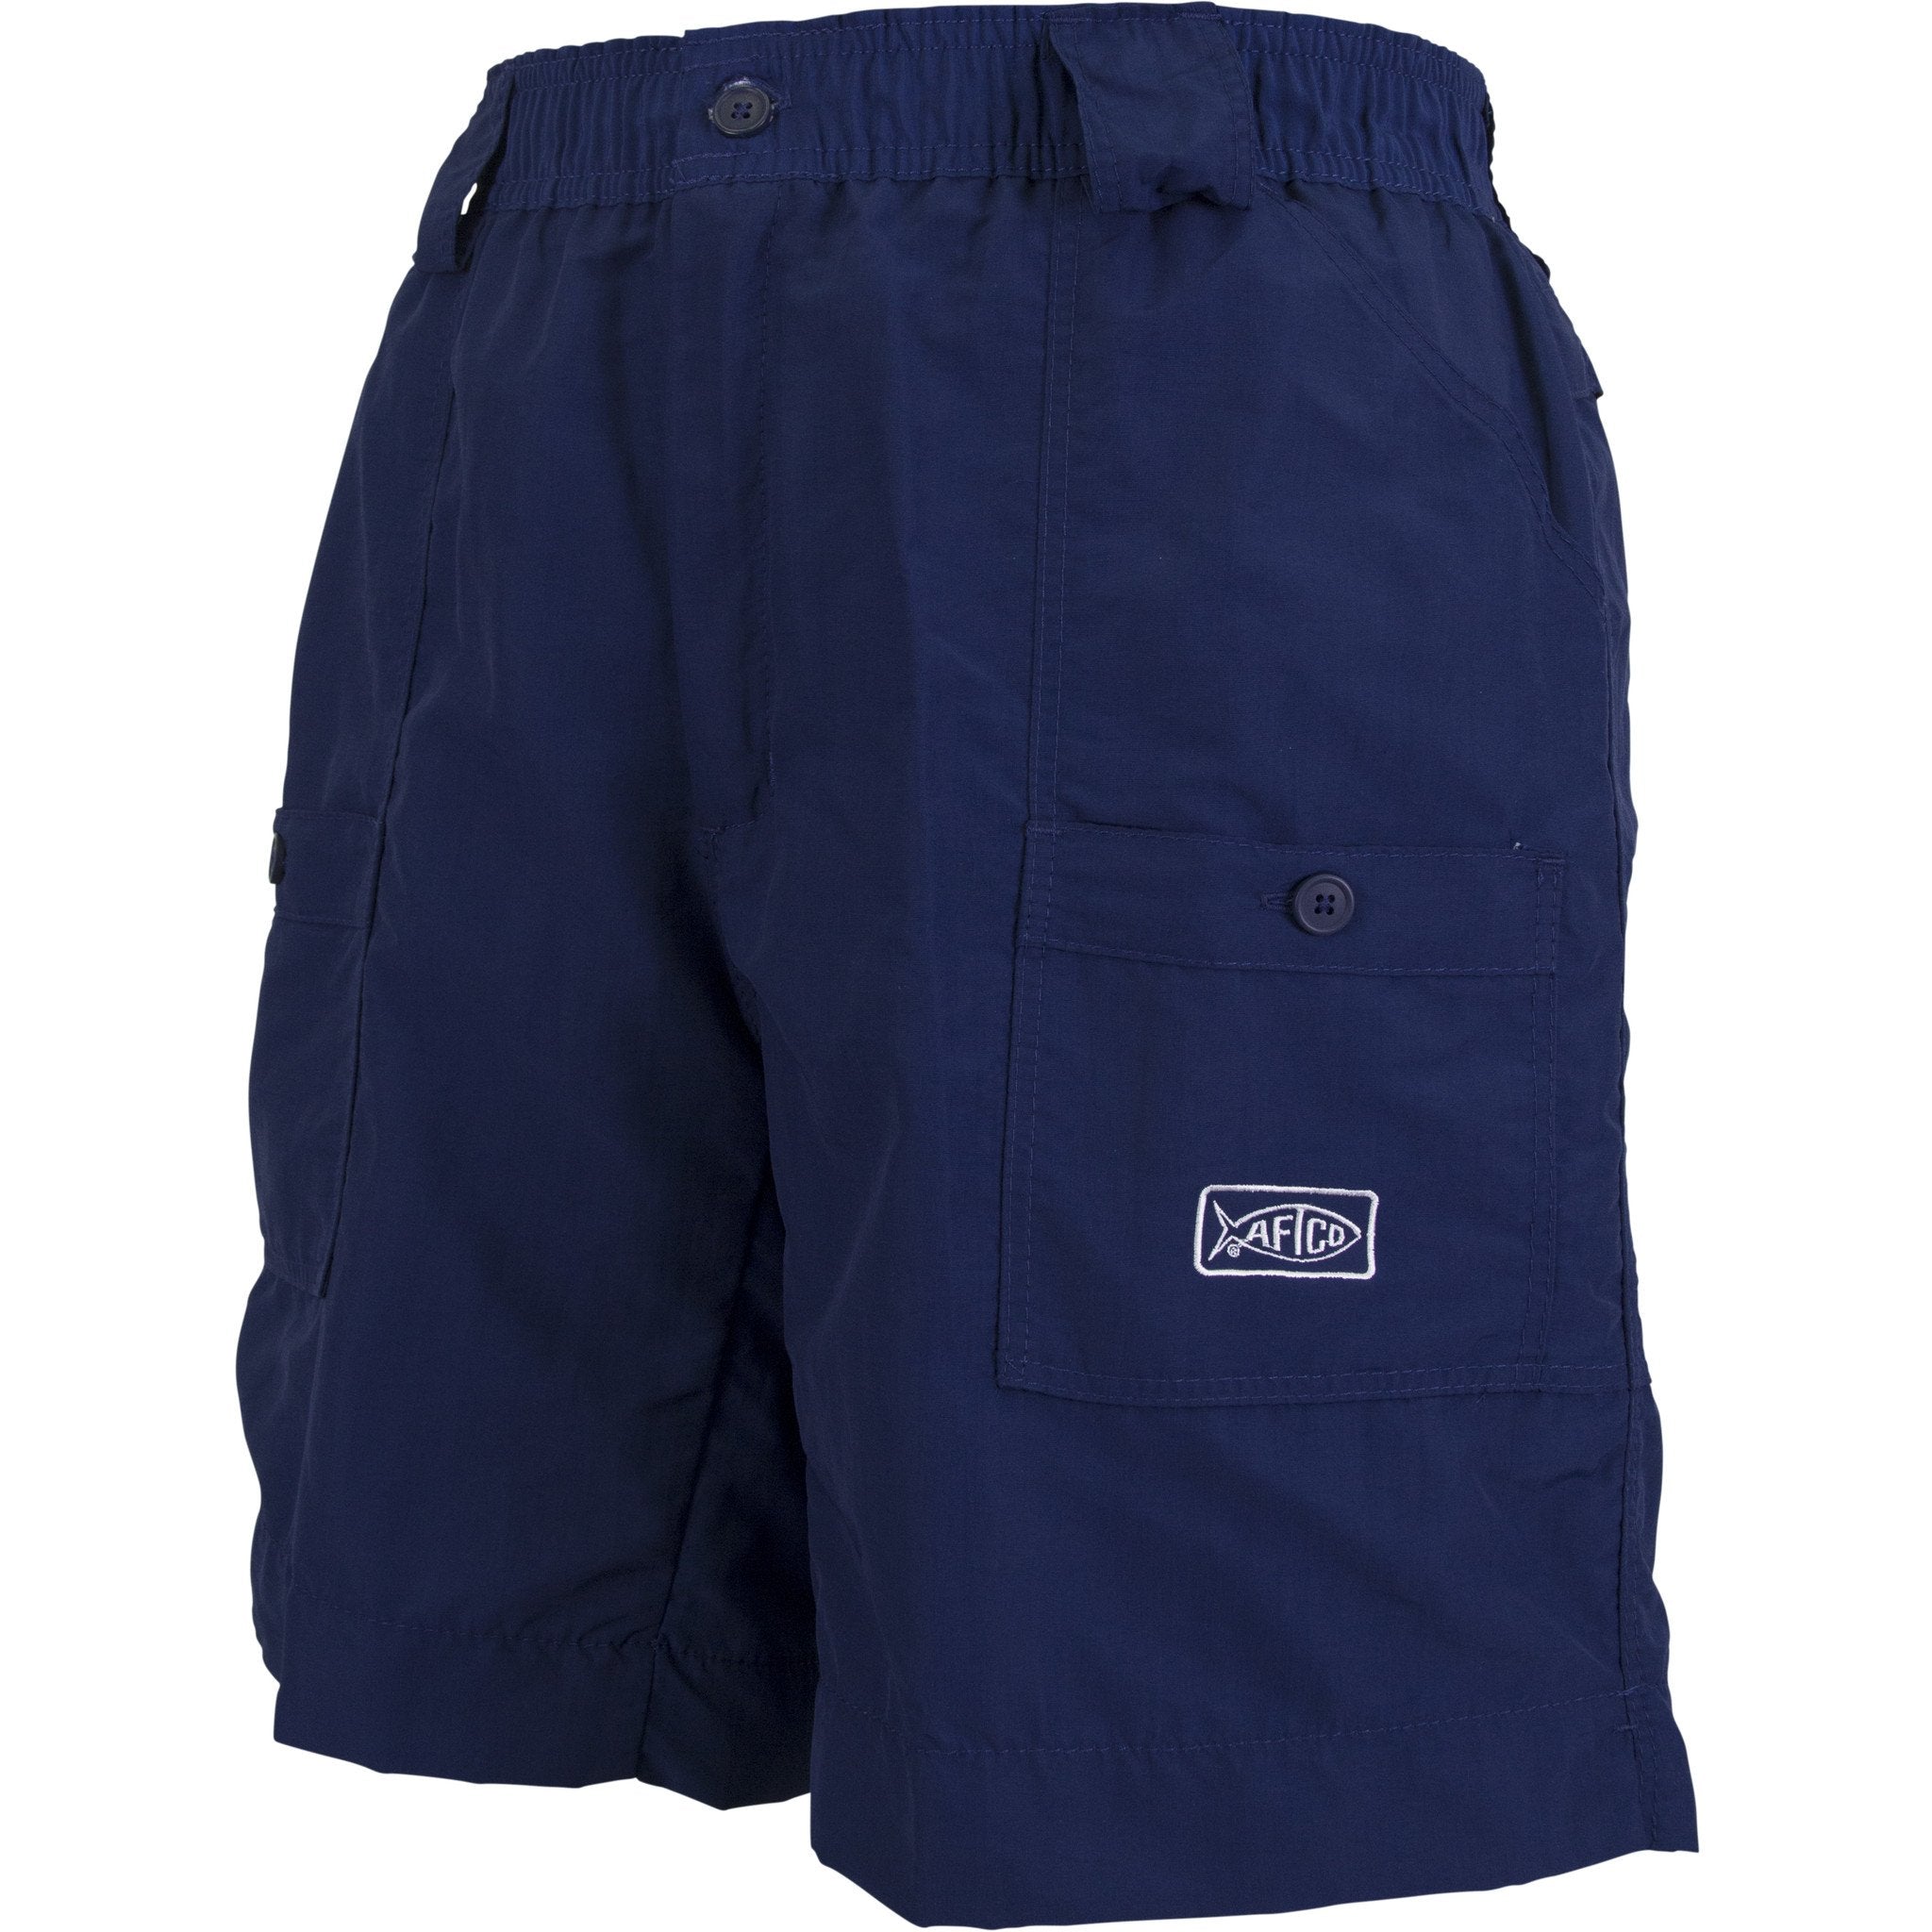 AFTCO MENS ORIGINAL LONG FISHING SHORT – Lazarus of Moultrie